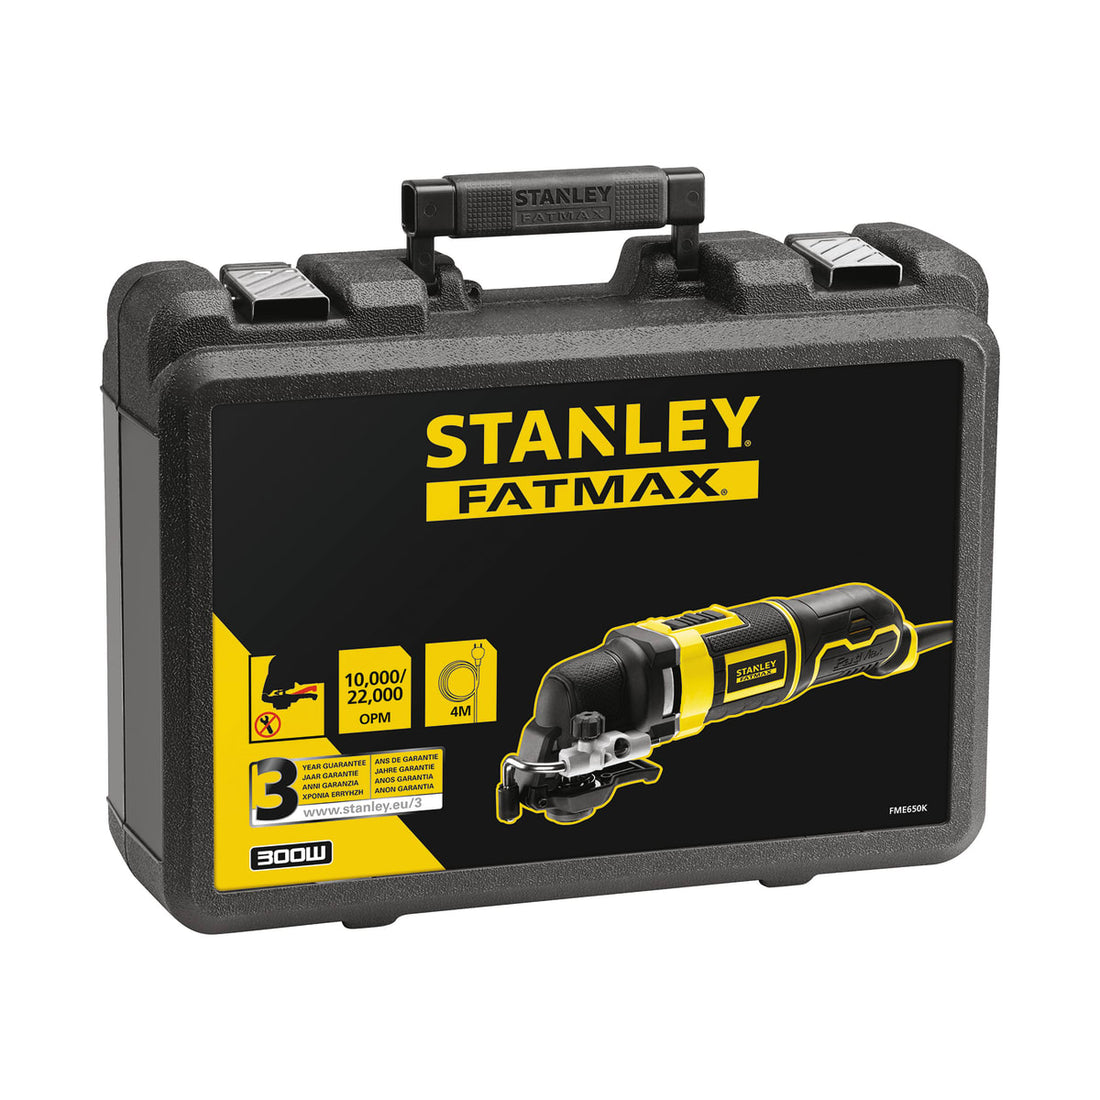 STANLEY FATMAX MINI-TOOL 230V, WITH 22 ACCESSORIES